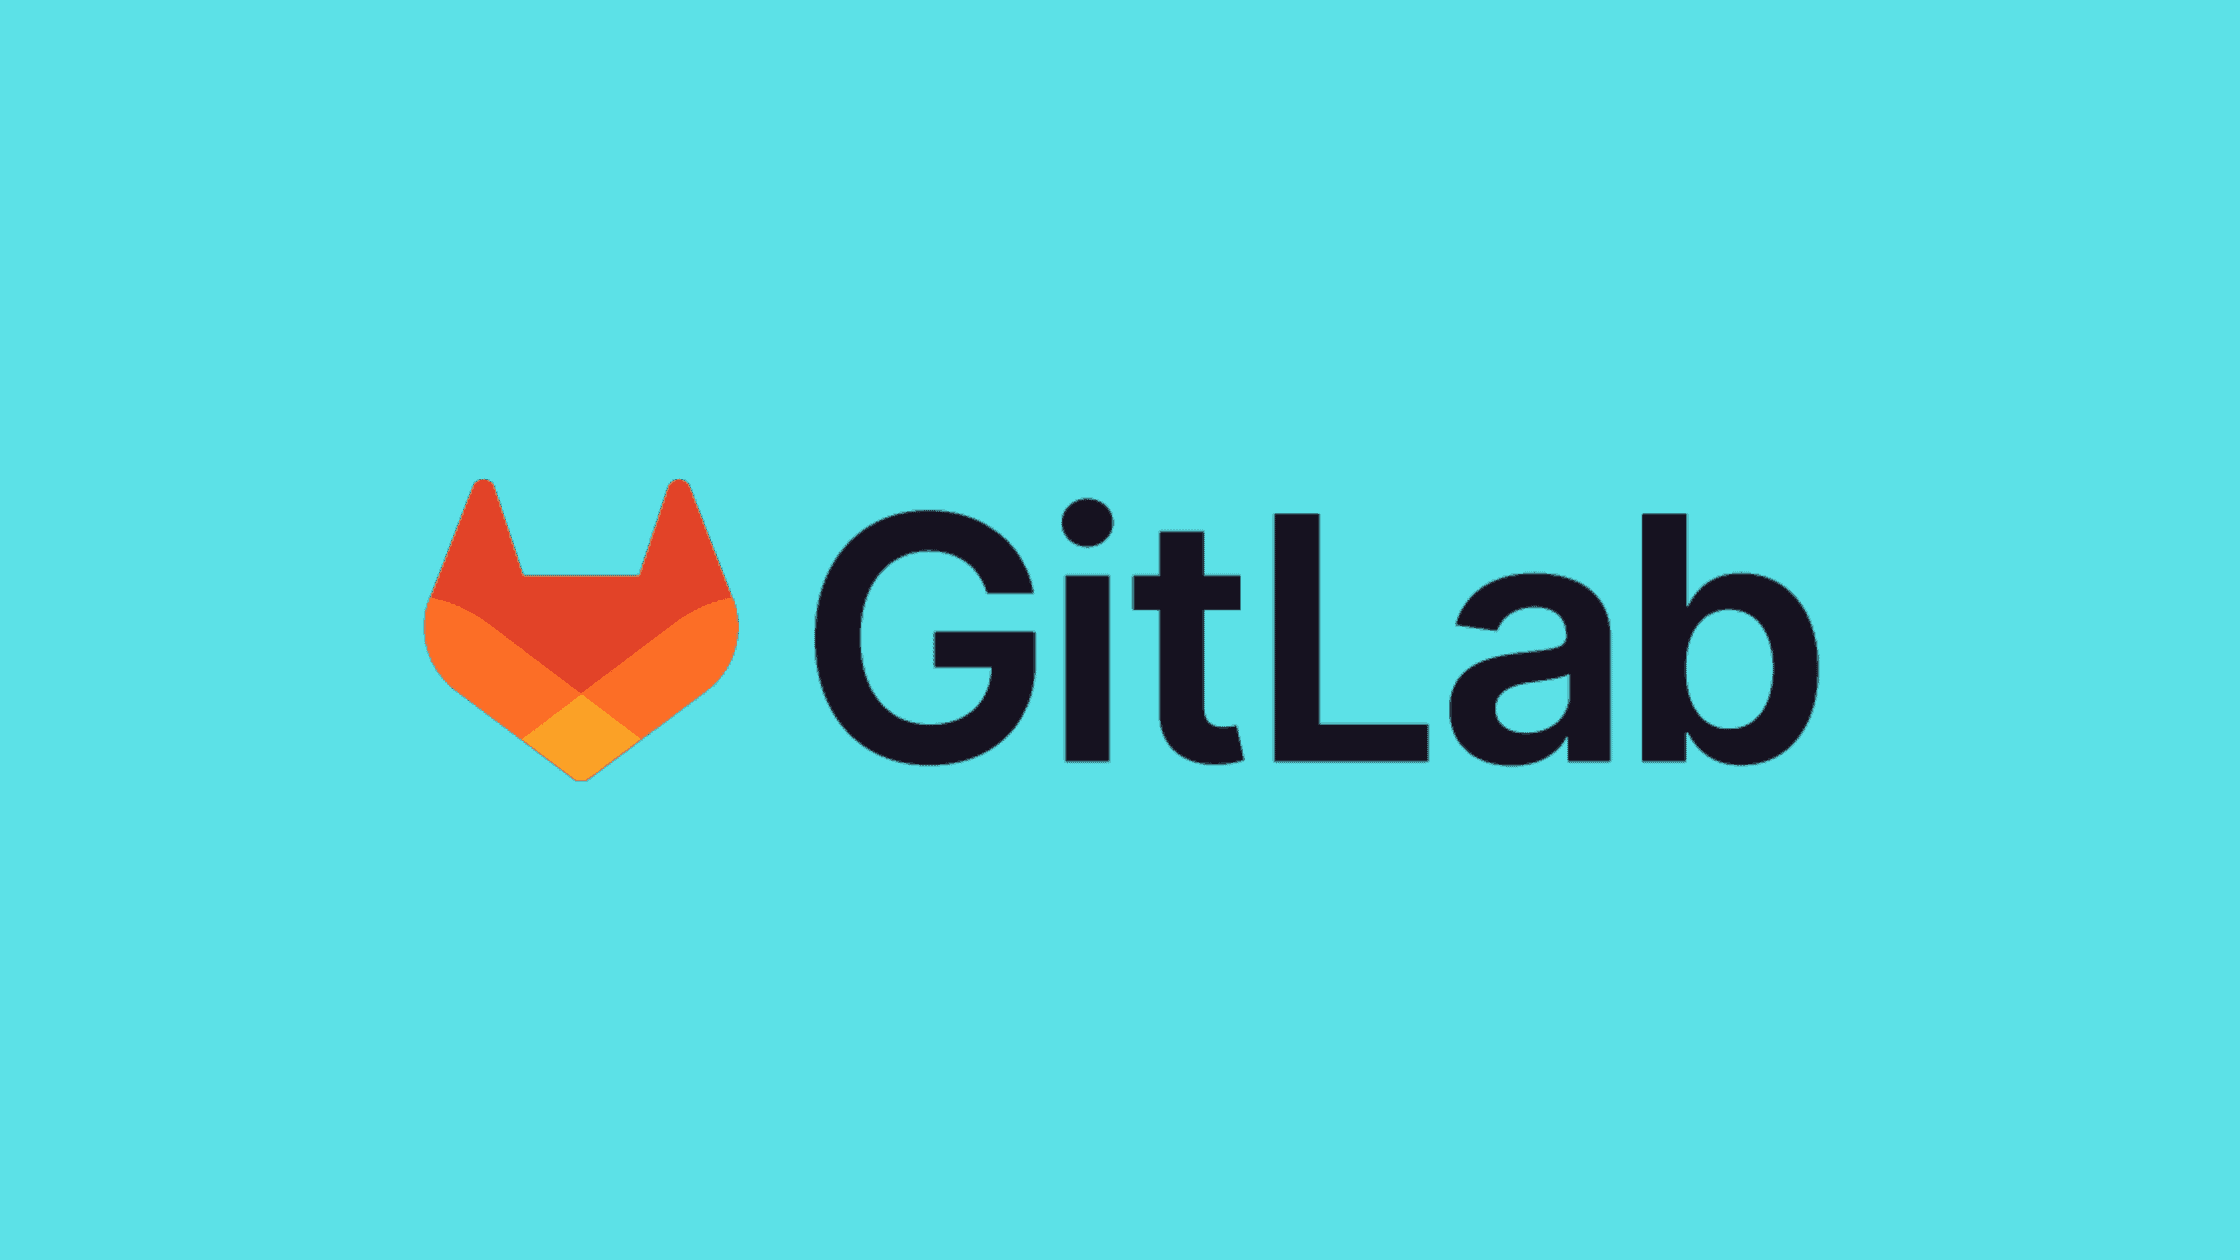 How To Fix Cve 2022 2884 A Remote Code Execution Vulnerability In Gitlab